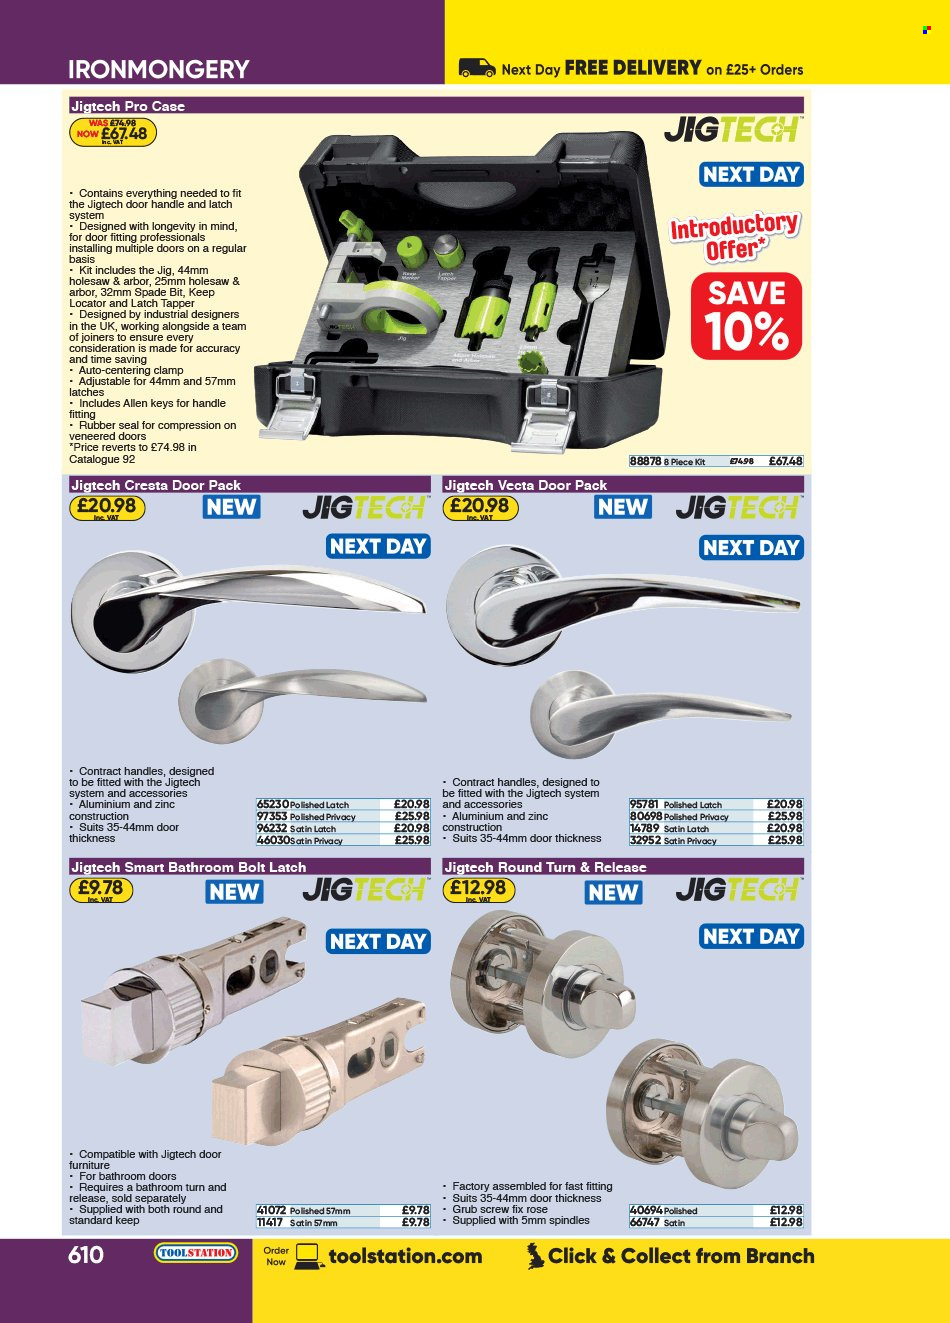 Toolstation offer . Page 610.